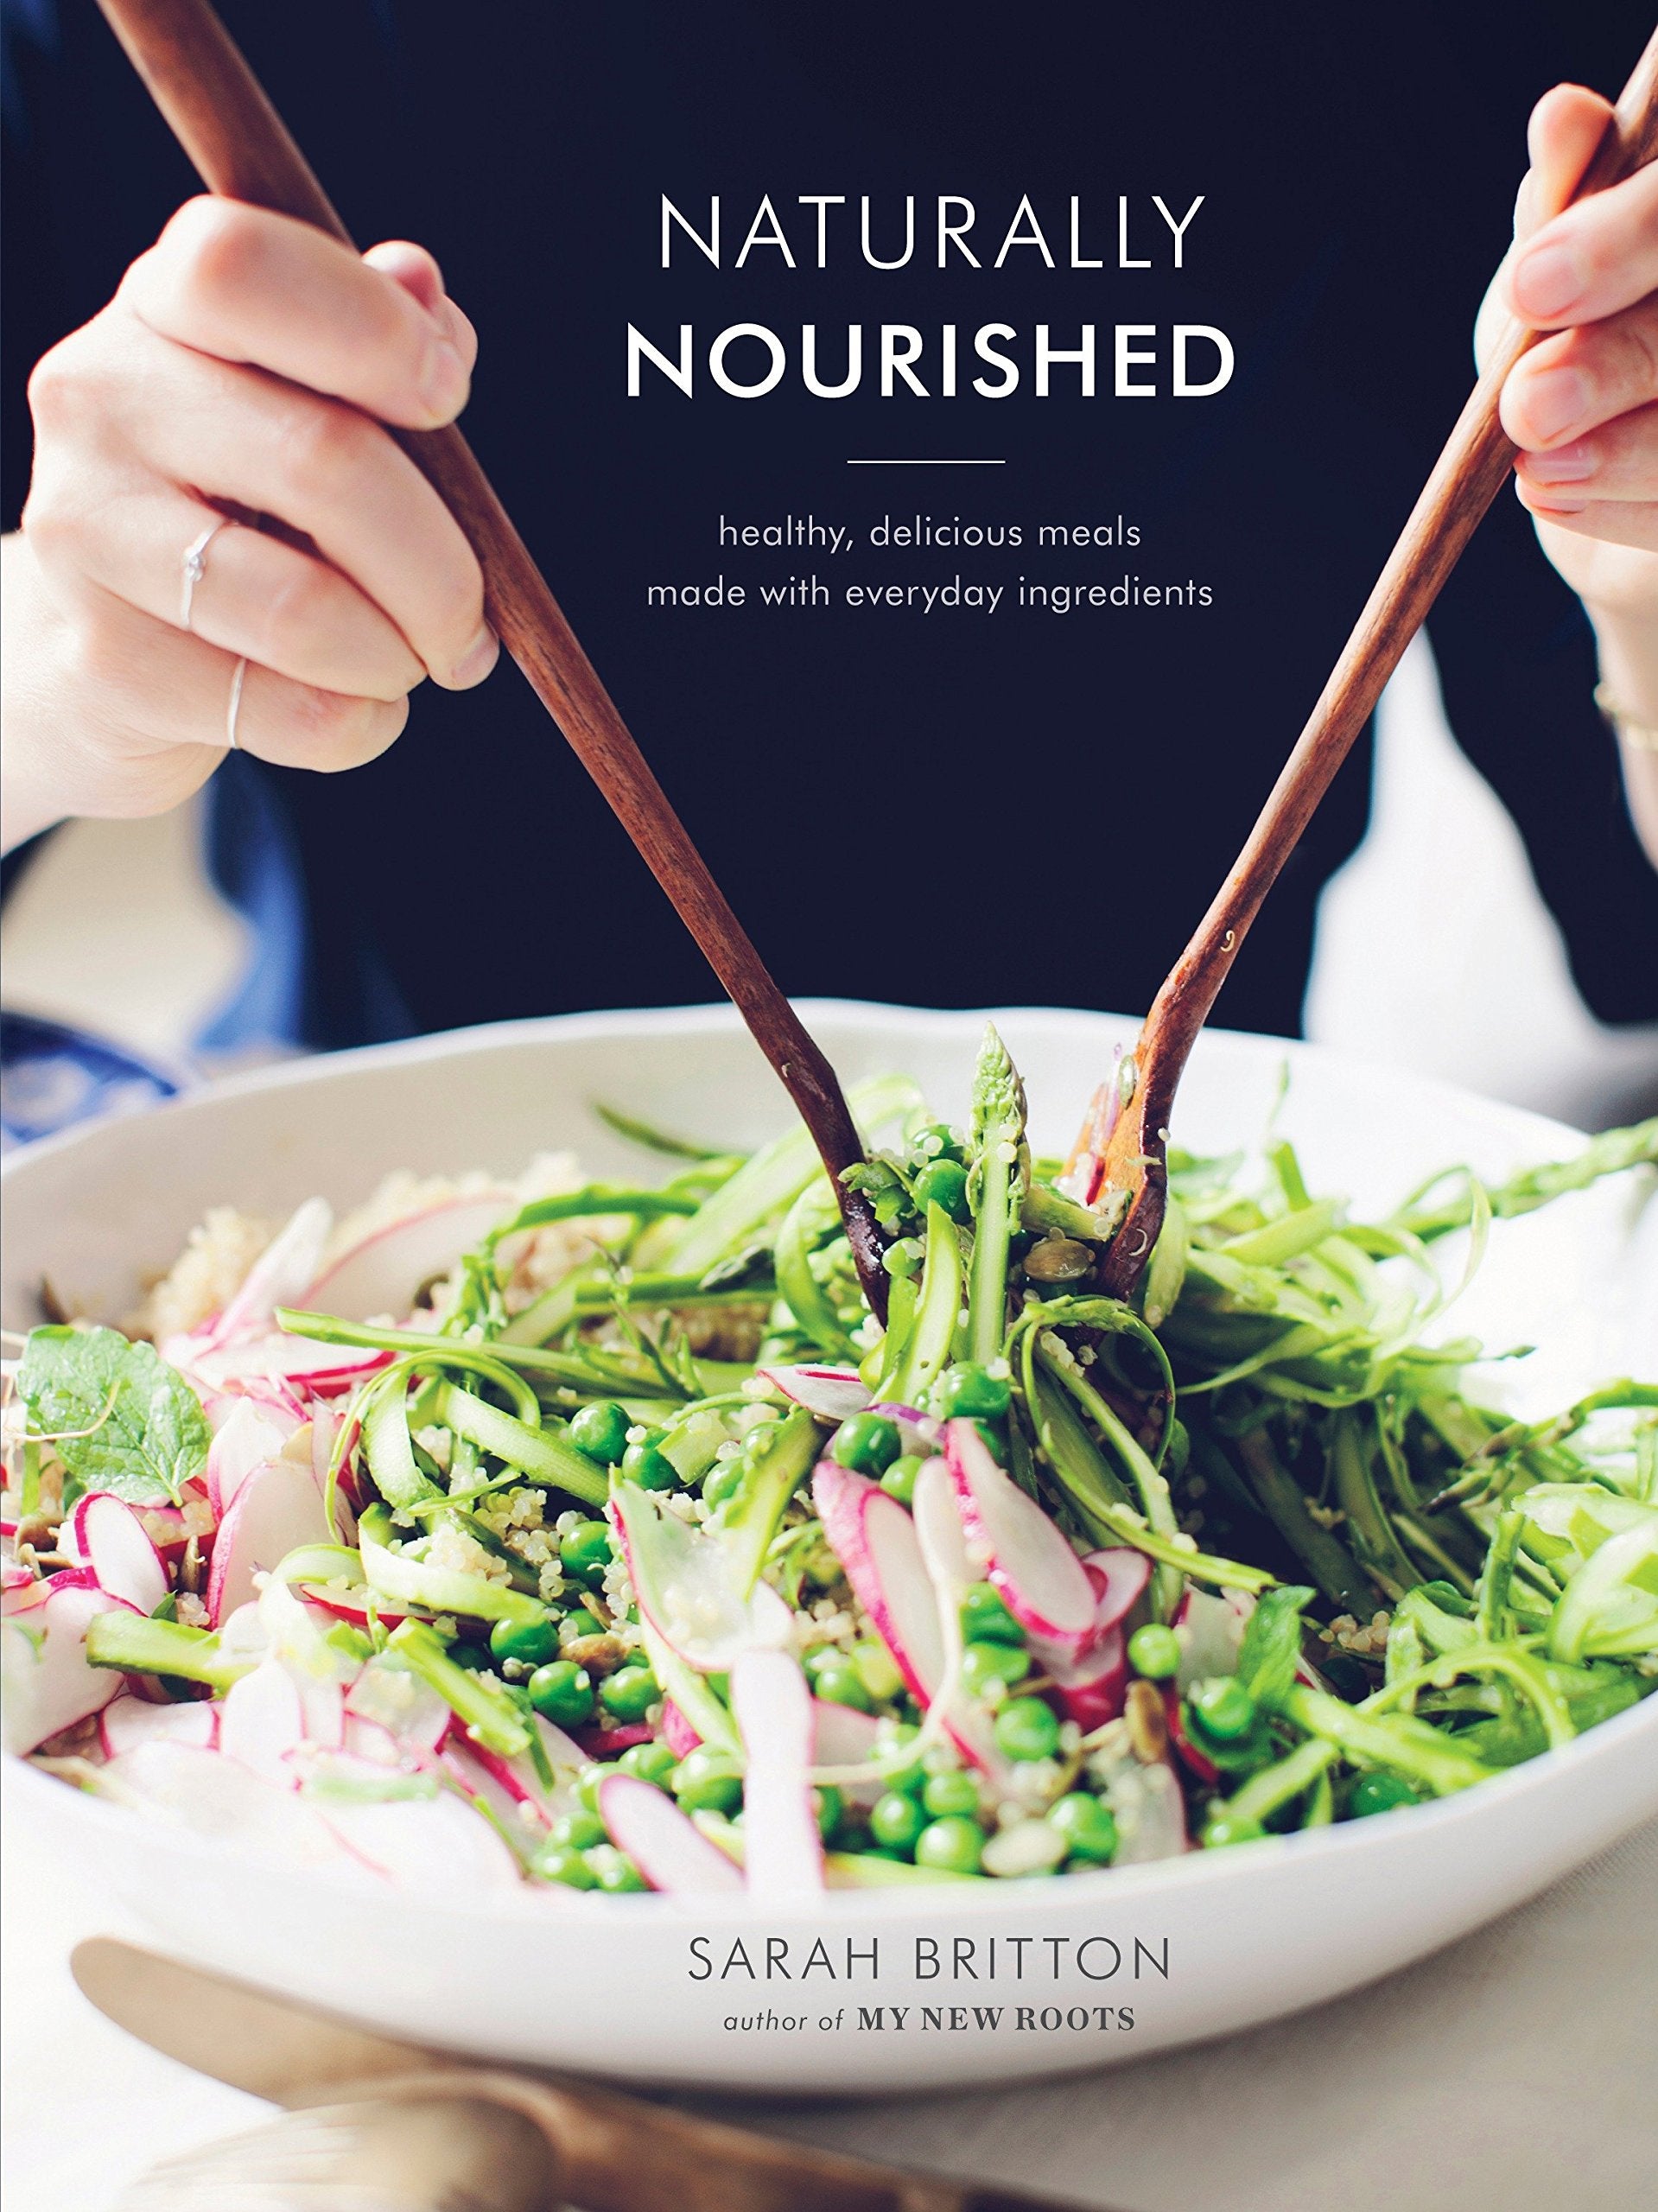 Naturally Nourished Cookbook: Healthy, Delicious Meals Made with Everyday Ingredients (Sarah Britton)